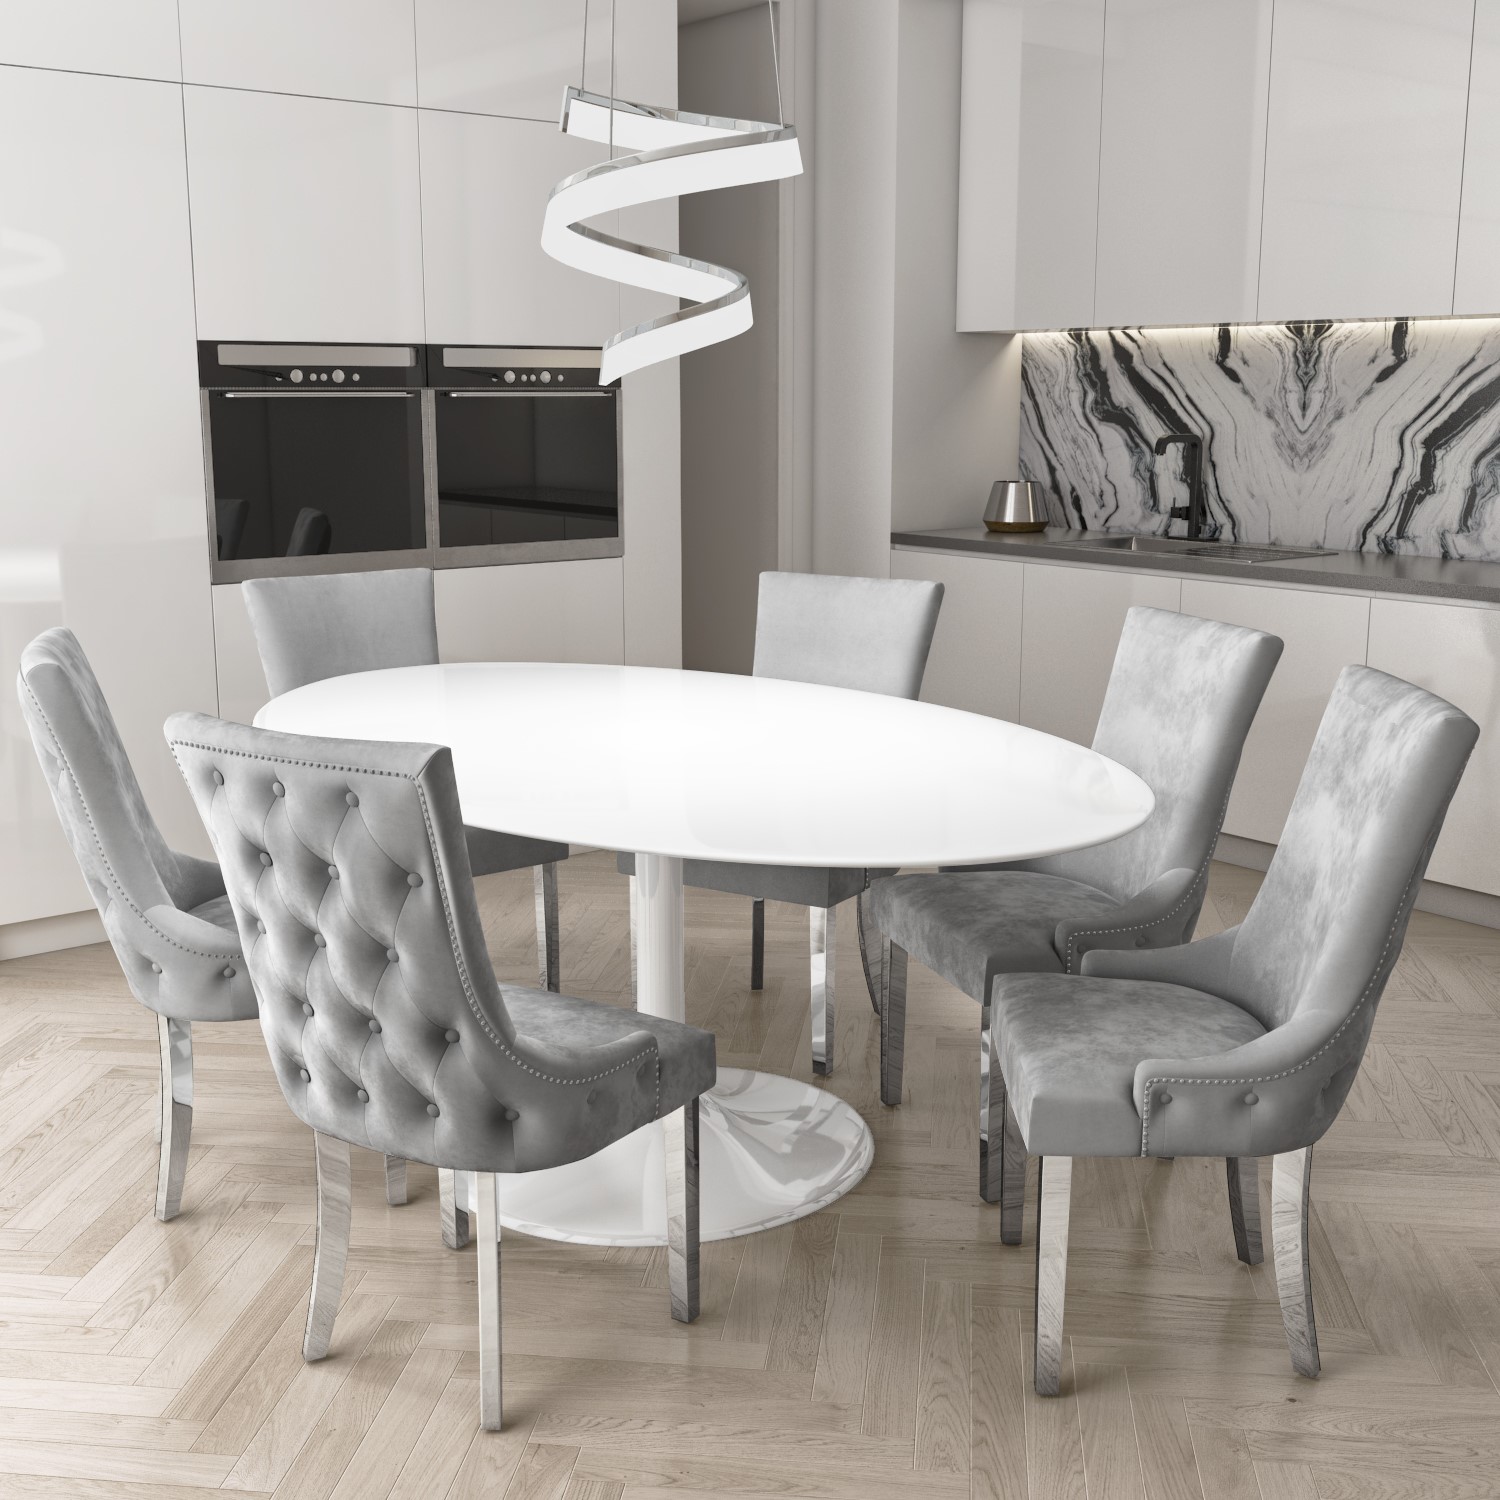 White Tulip Oval Dining Table In High Gloss Seats 6 Aura Furniture123